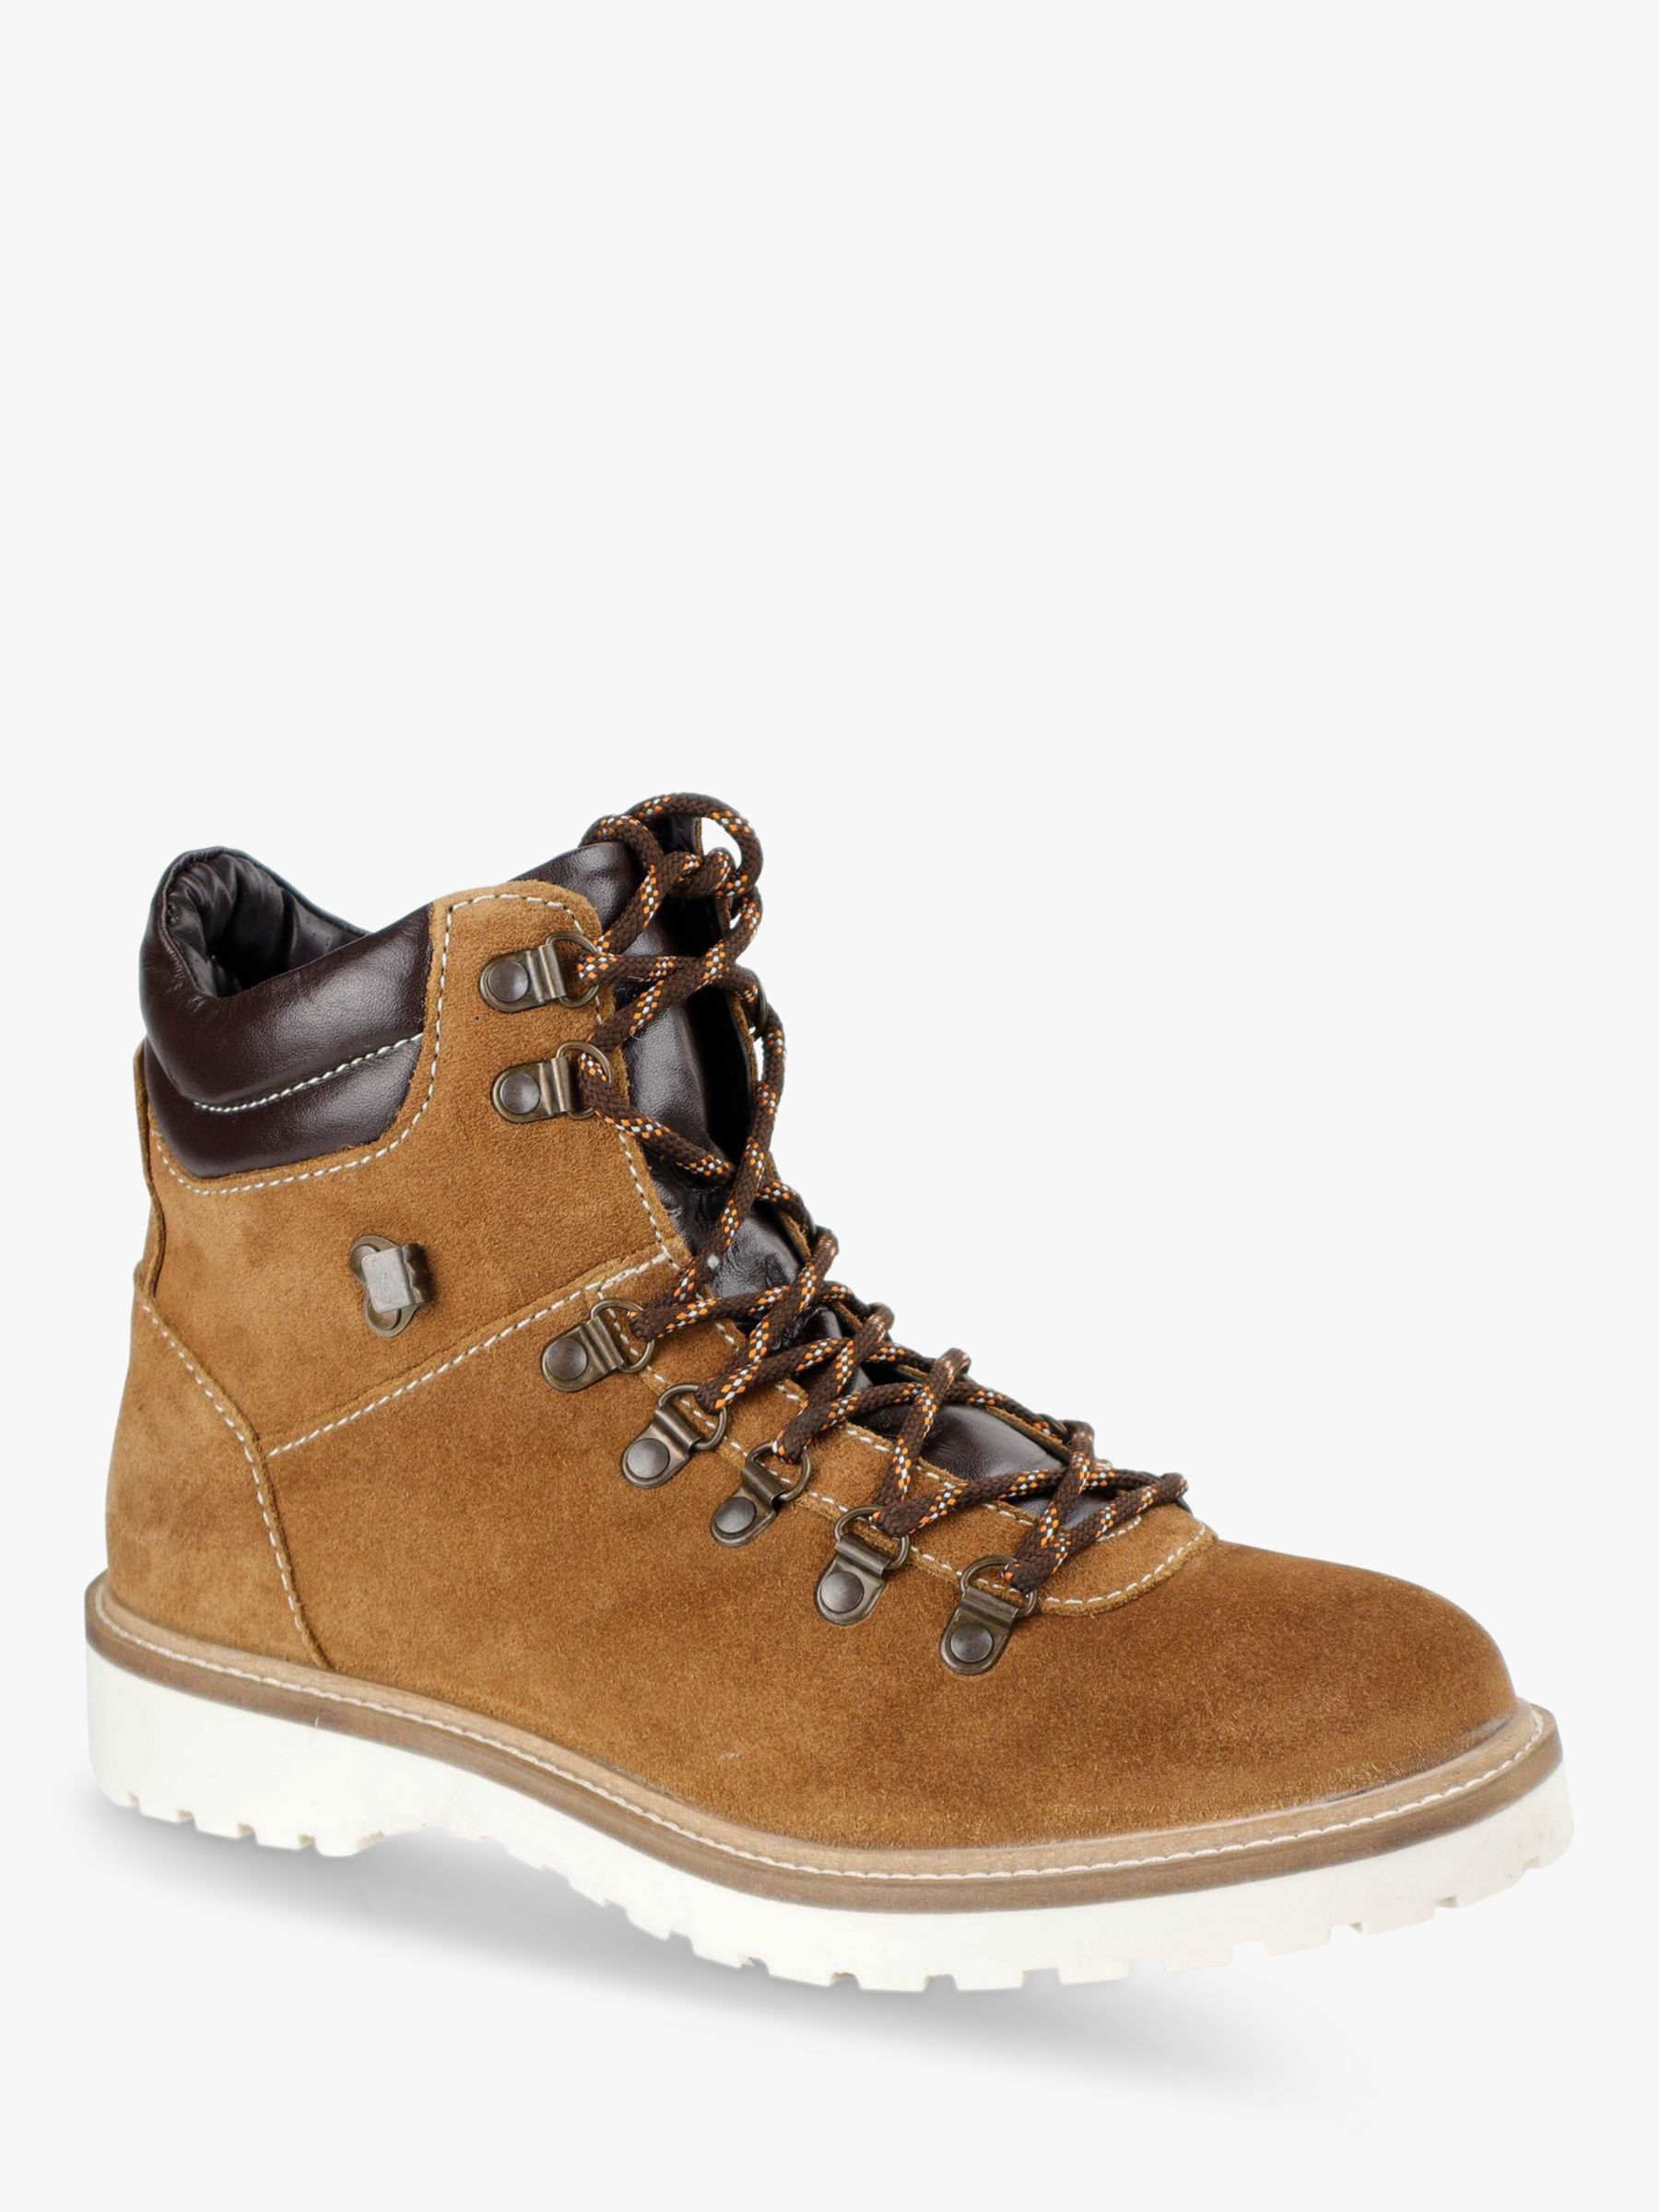 Buy Silver Street London Connaught Suede Lace Up Boots, Tan Online at johnlewis.com